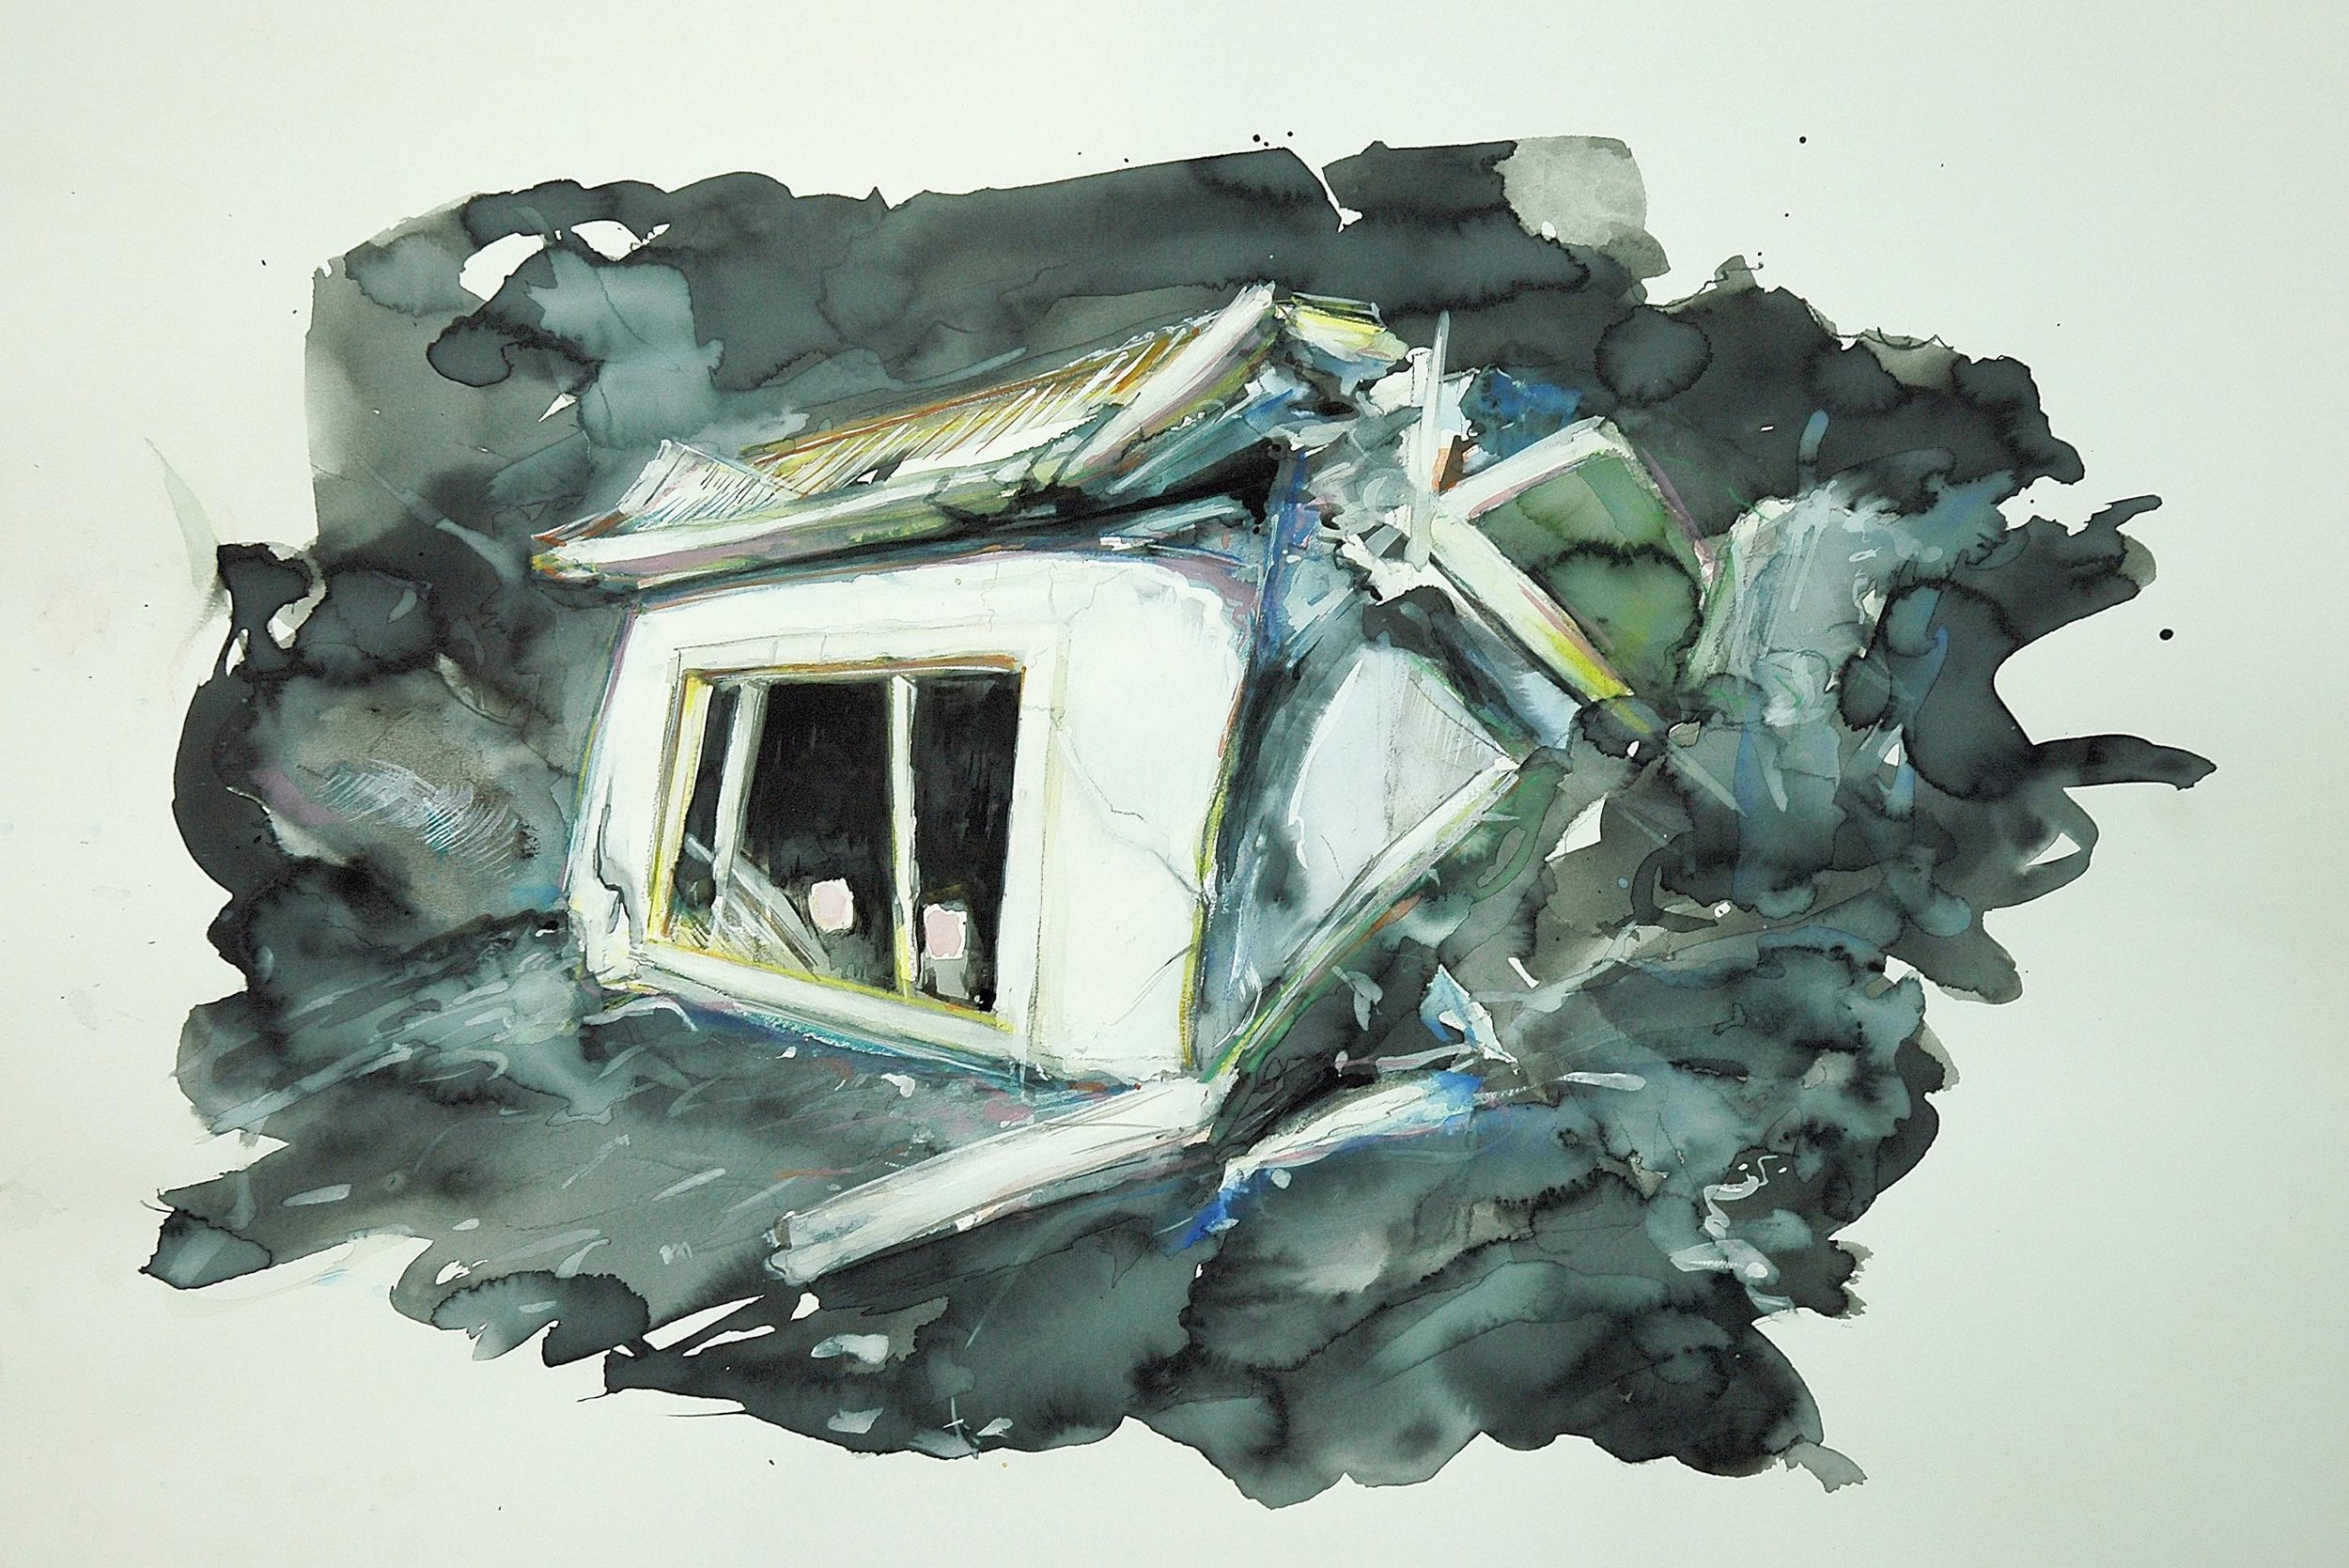   Nighthouse,  2009, watercolour and goache on paper, 65 x 100cm.&nbsp;    